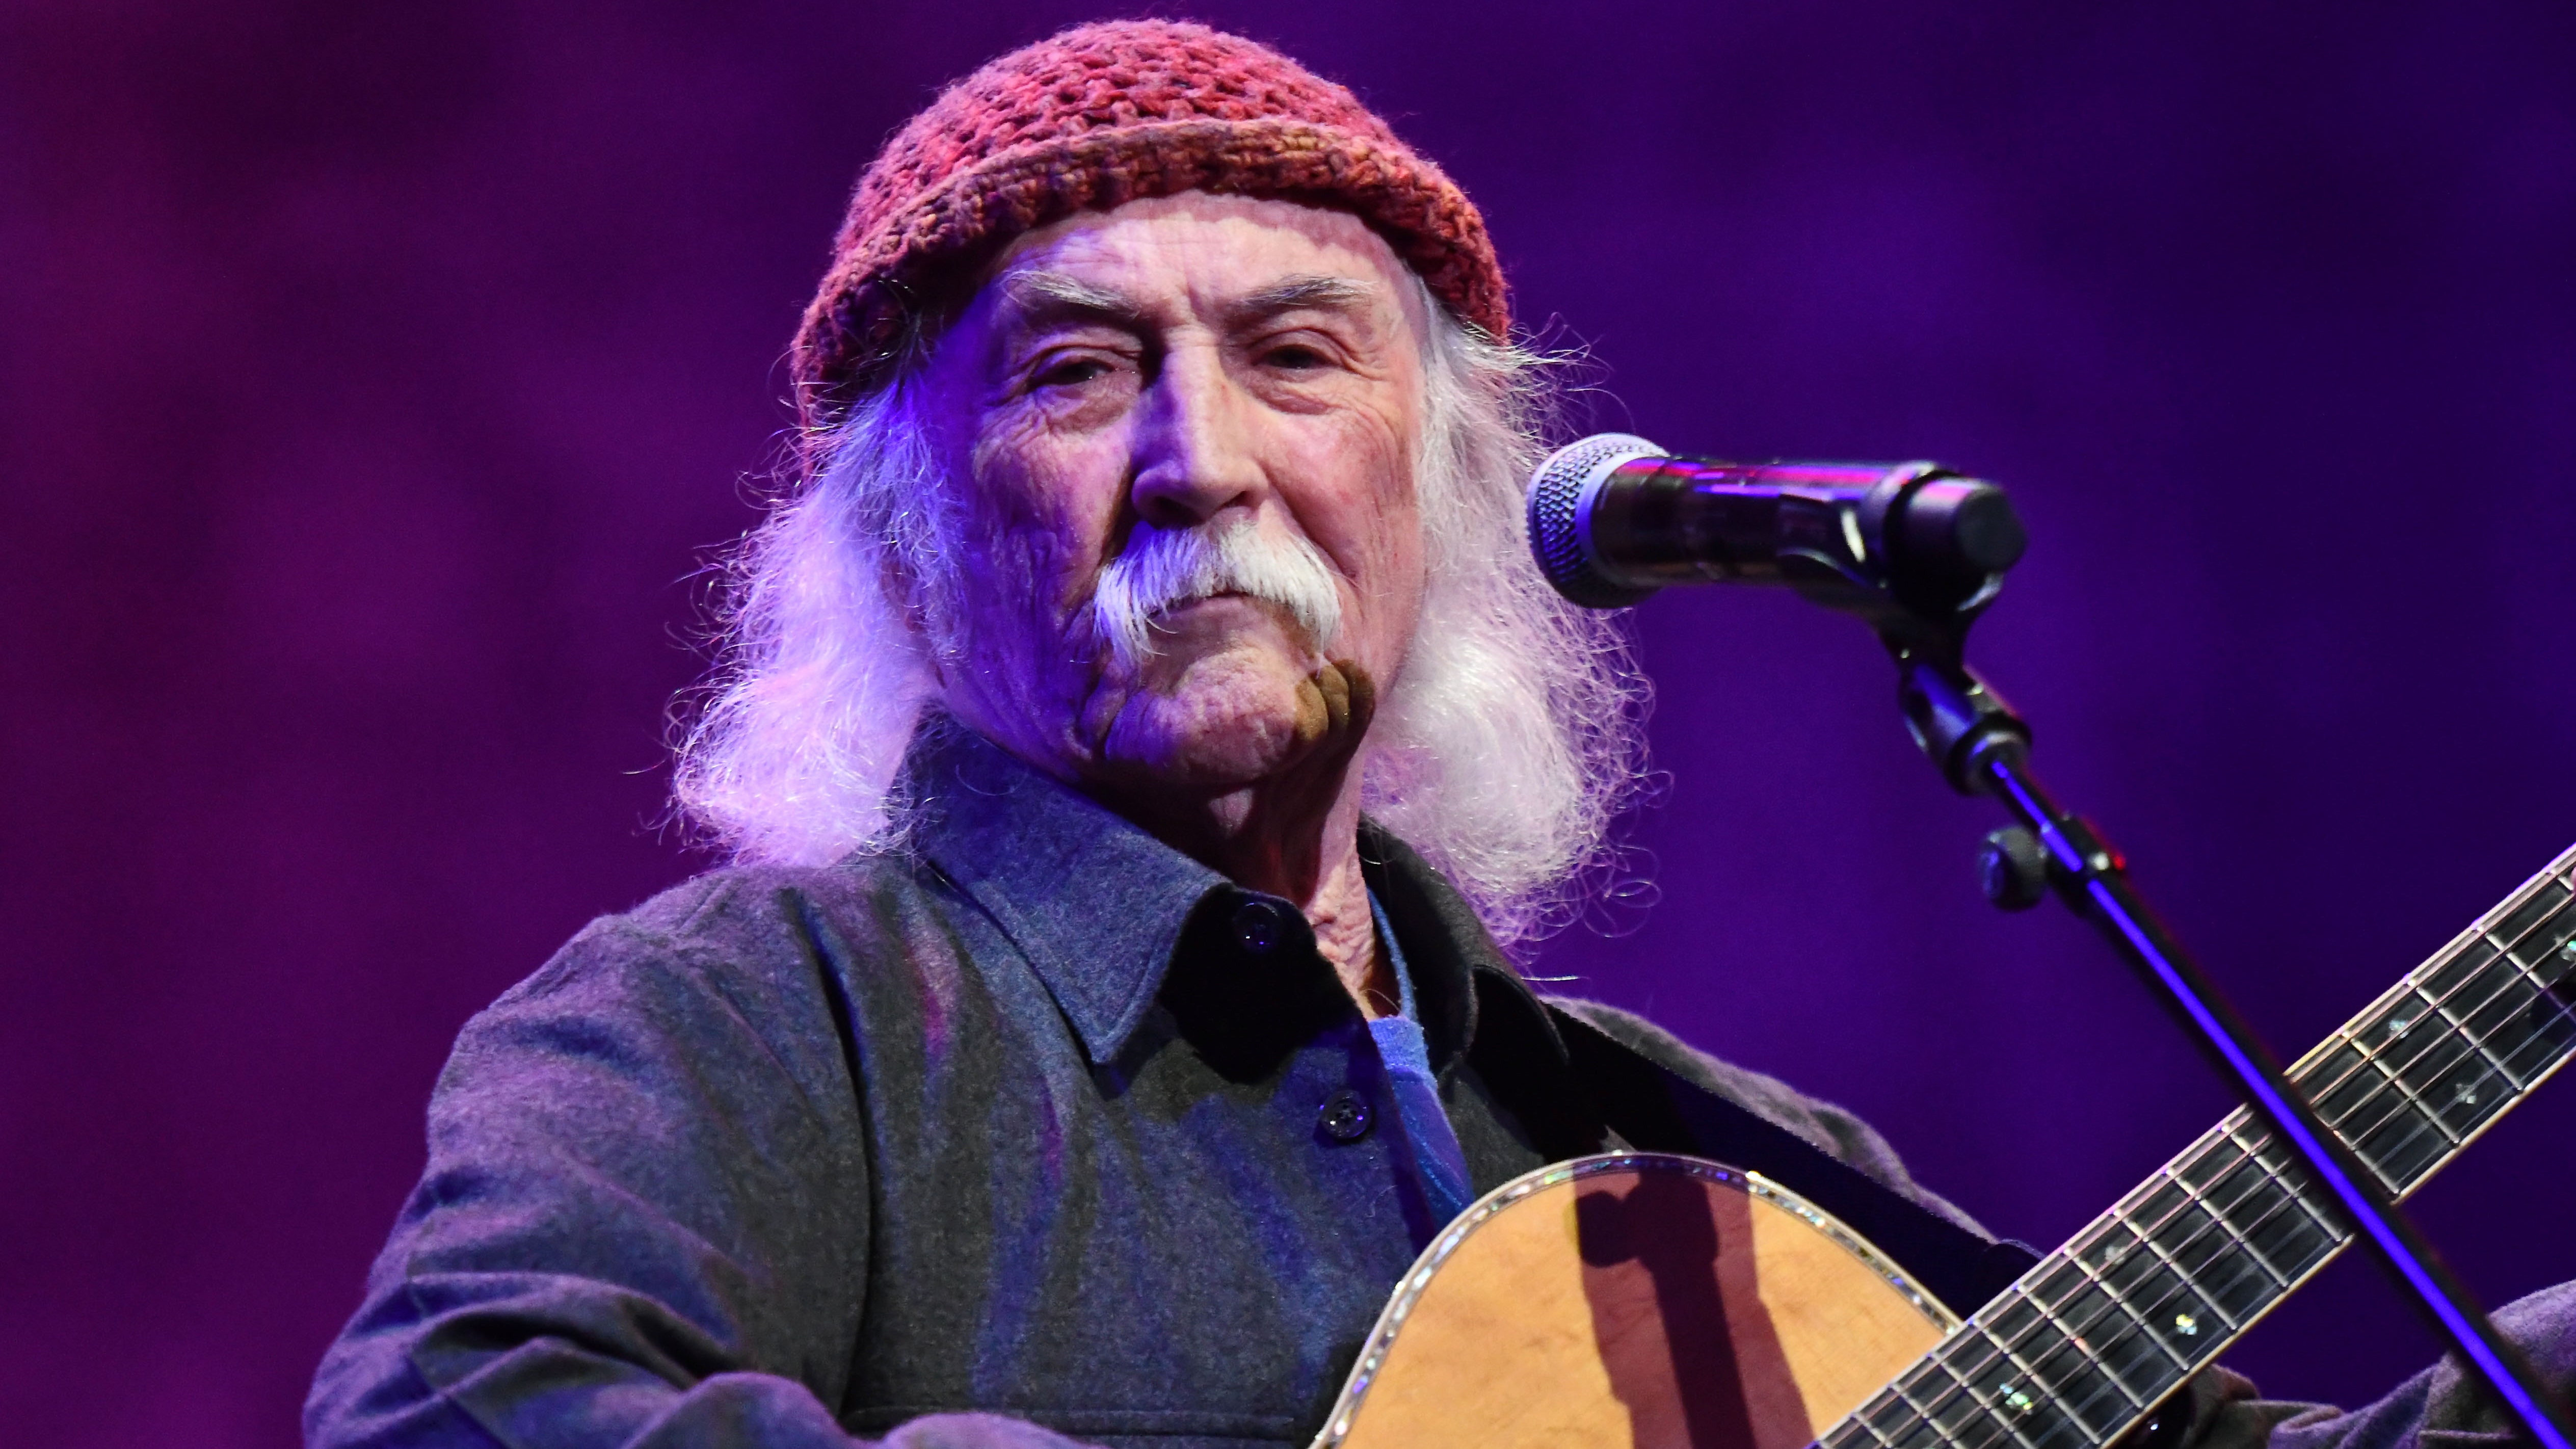 David Crosby Opens Up About Coronavirus: “If I Lose the Tours, I Probably Will Lose My Home”